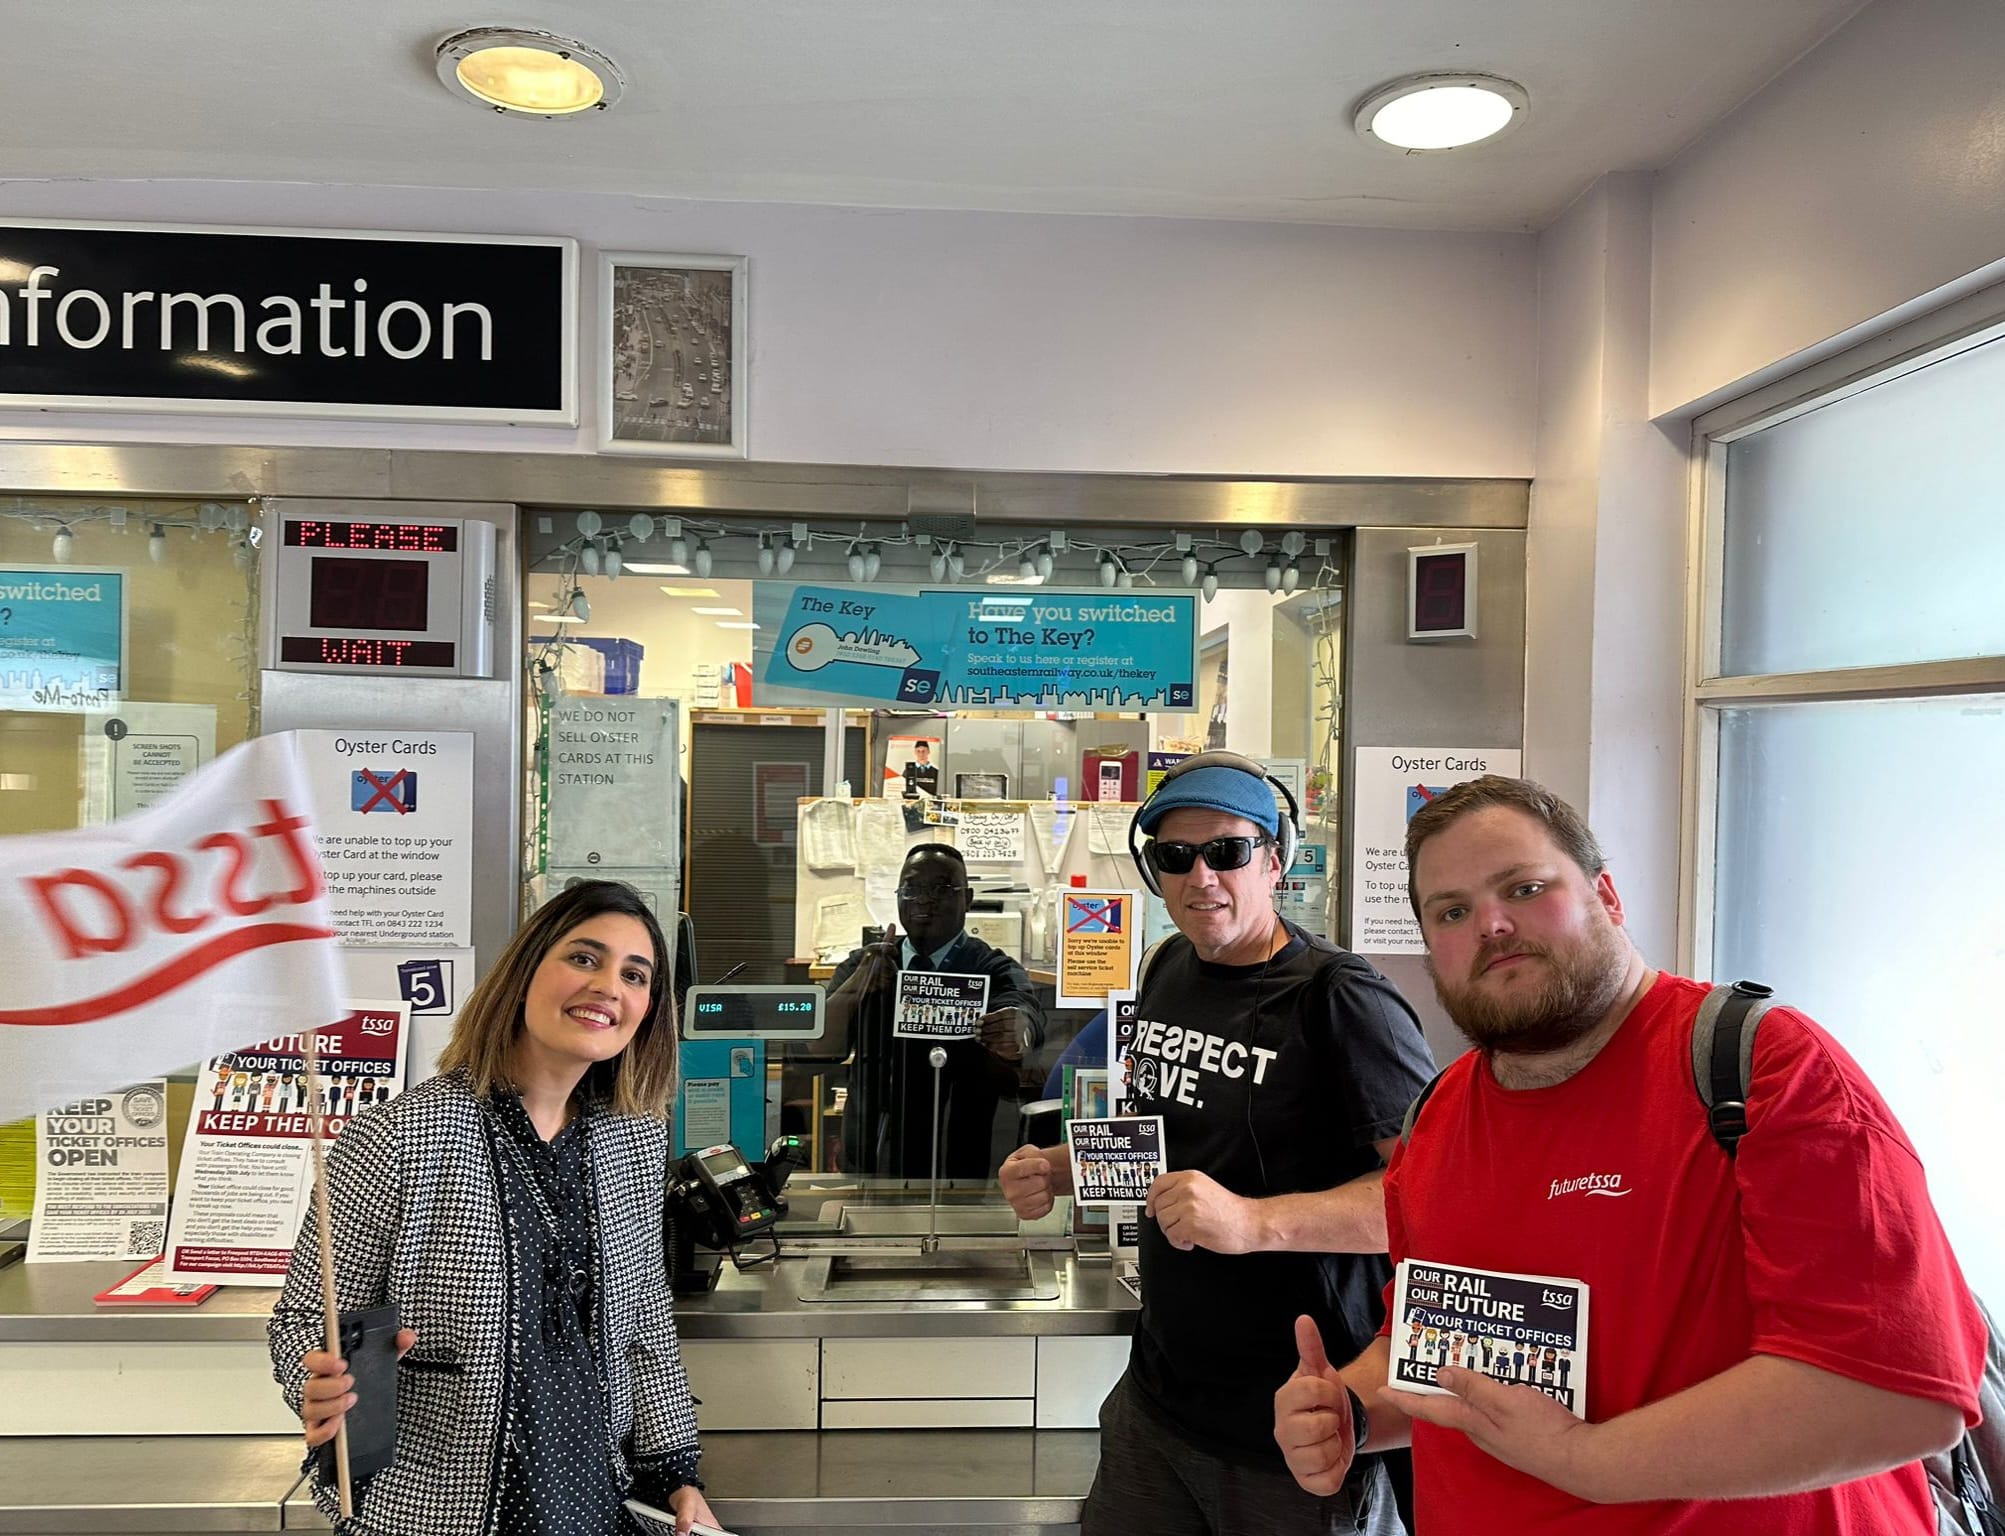 Maryam Eslamdoust, a persian woman with shoulder length hair and a grey suit holding a TSSA flag standing in front of a ticket office with a young man in a red tshirt, an older man in a black t shirt. There is a black man behind the ticket office window. They are smiling and holding TSSA ticket office campaign leaflets.